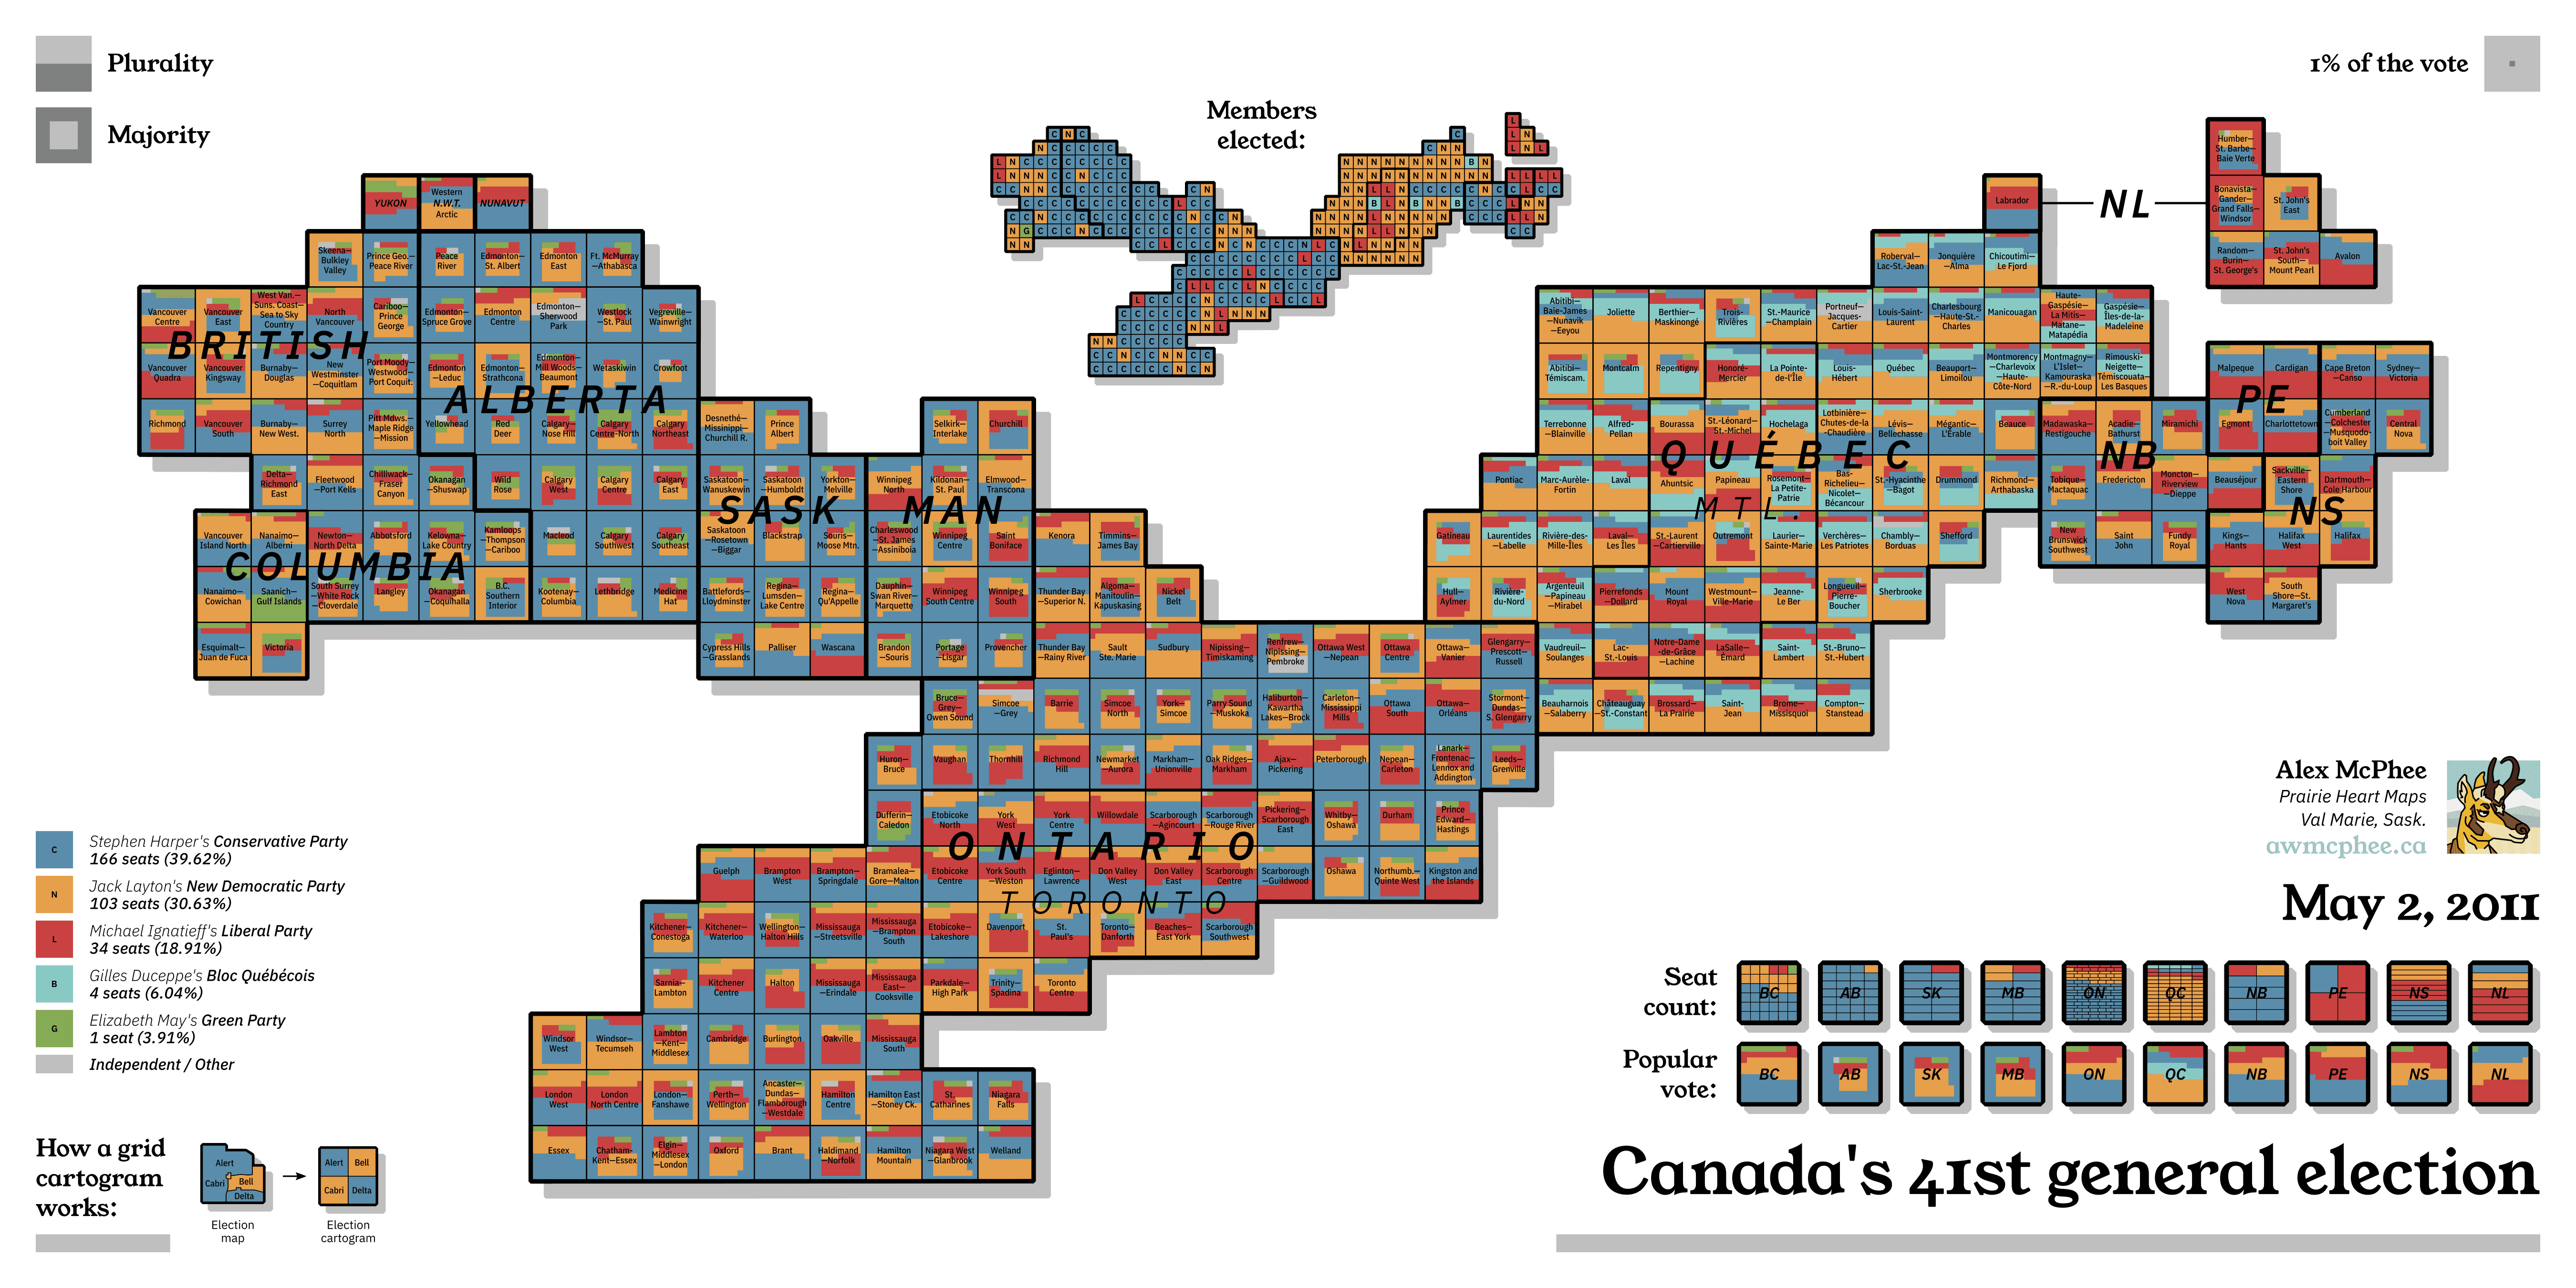 A grid cartogram depicting the results of Canada's 2011 federal election.